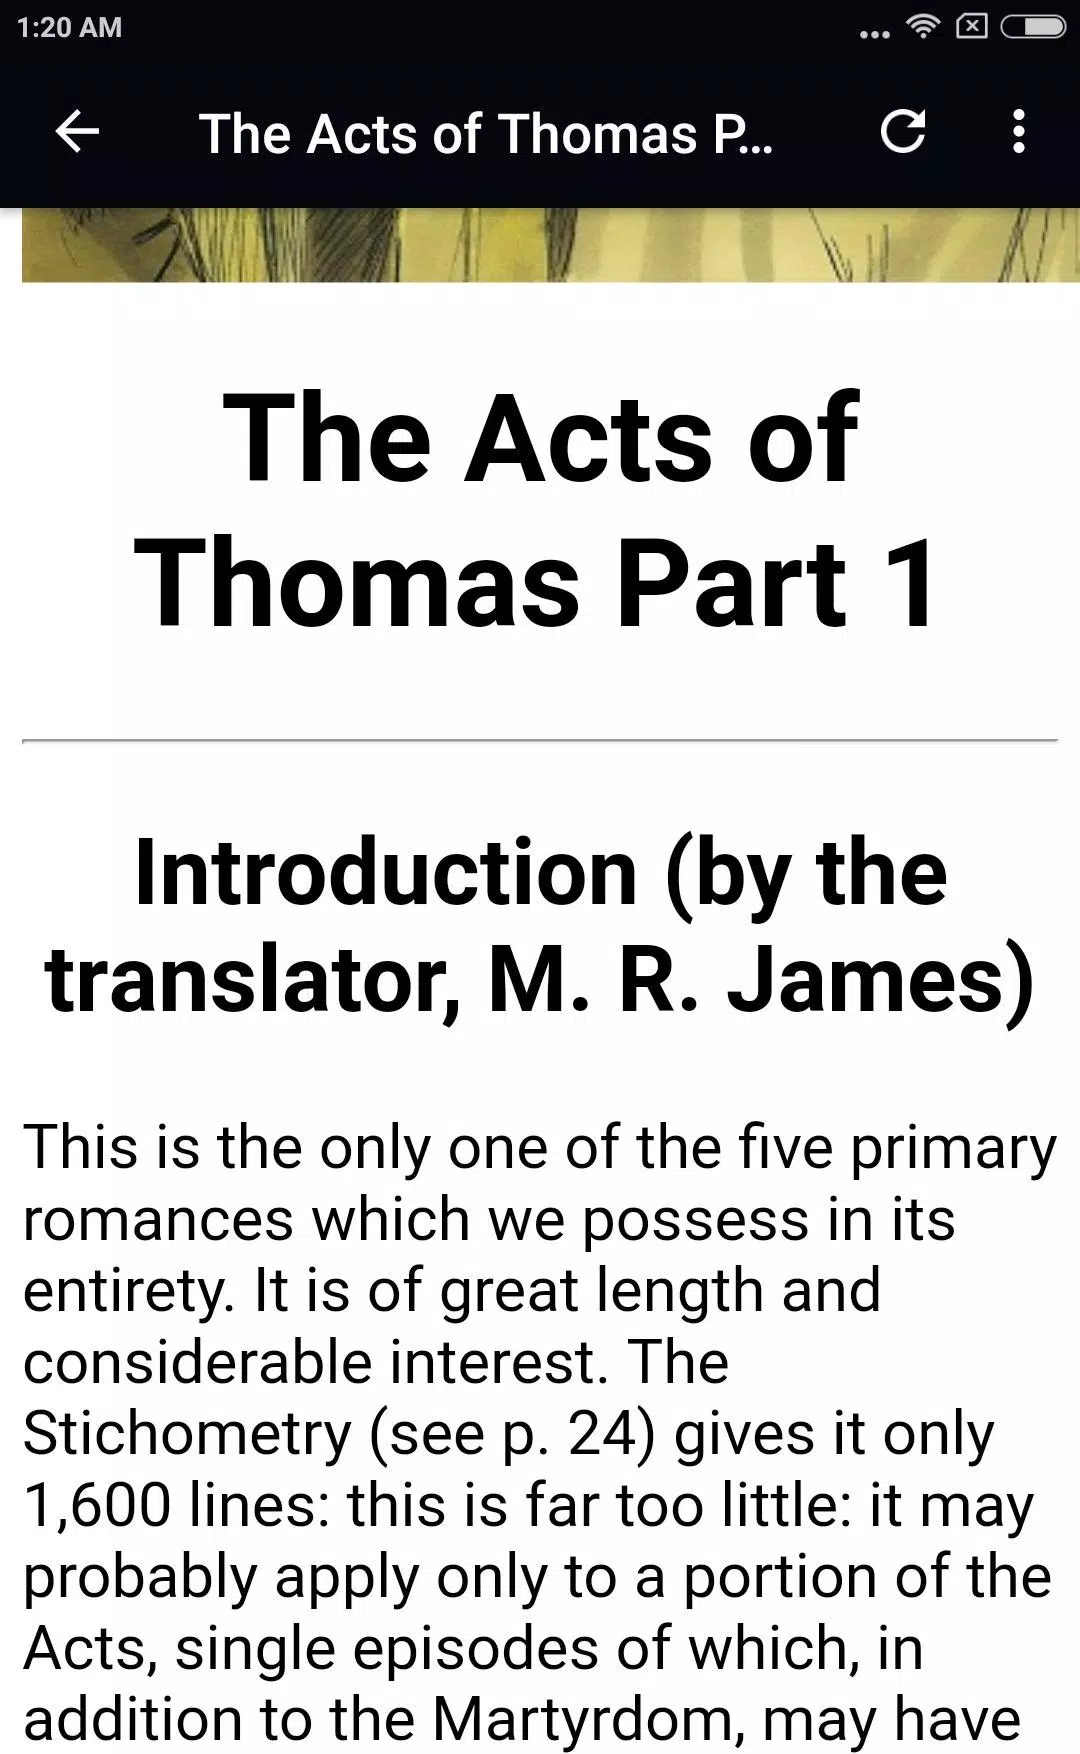 The Gospel of Thomas::Appstore for Android